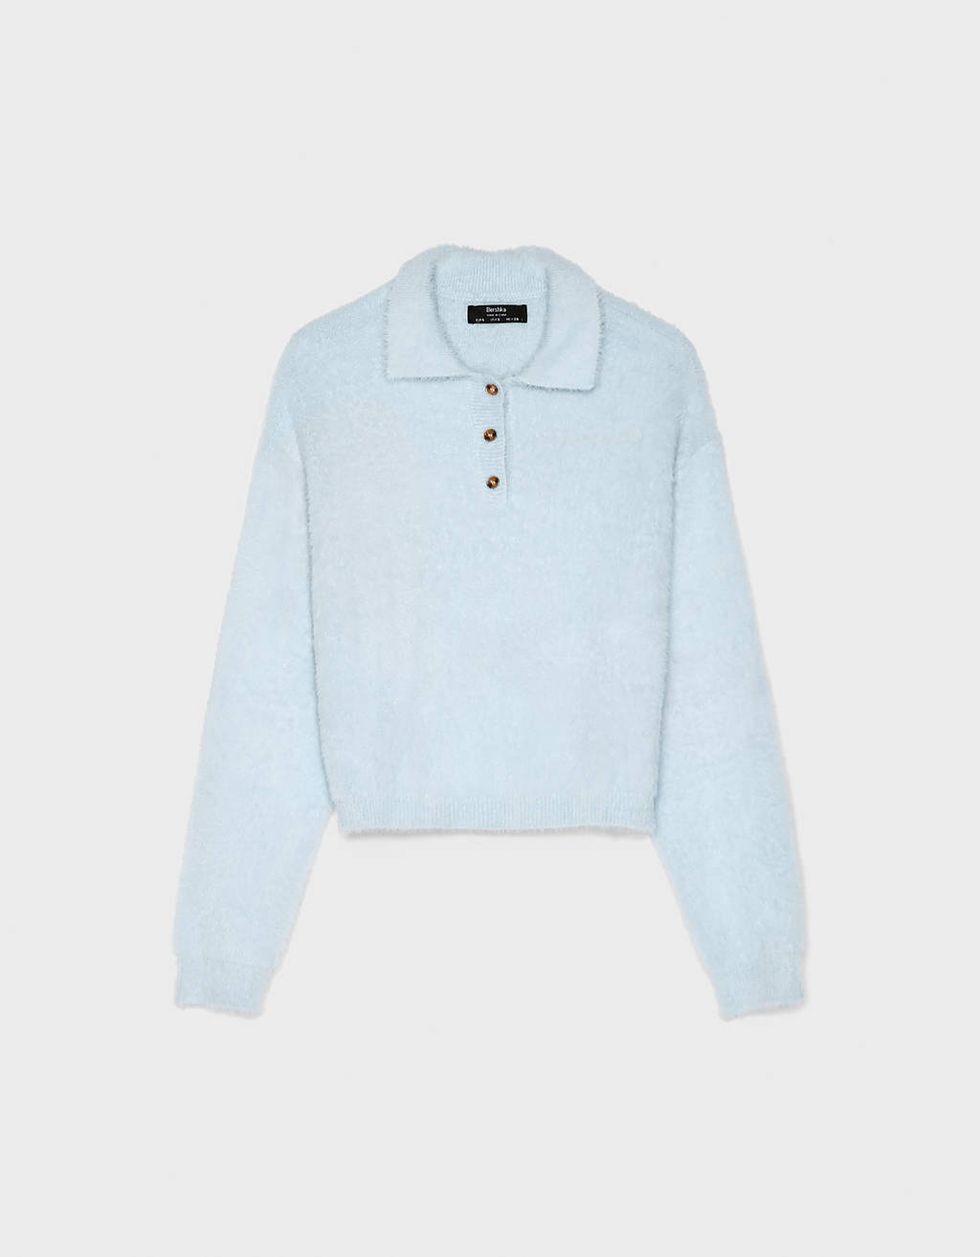 Clothing, White, Blue, Sleeve, Outerwear, Sweater, Collar, Top, Long-sleeved t-shirt, T-shirt, 